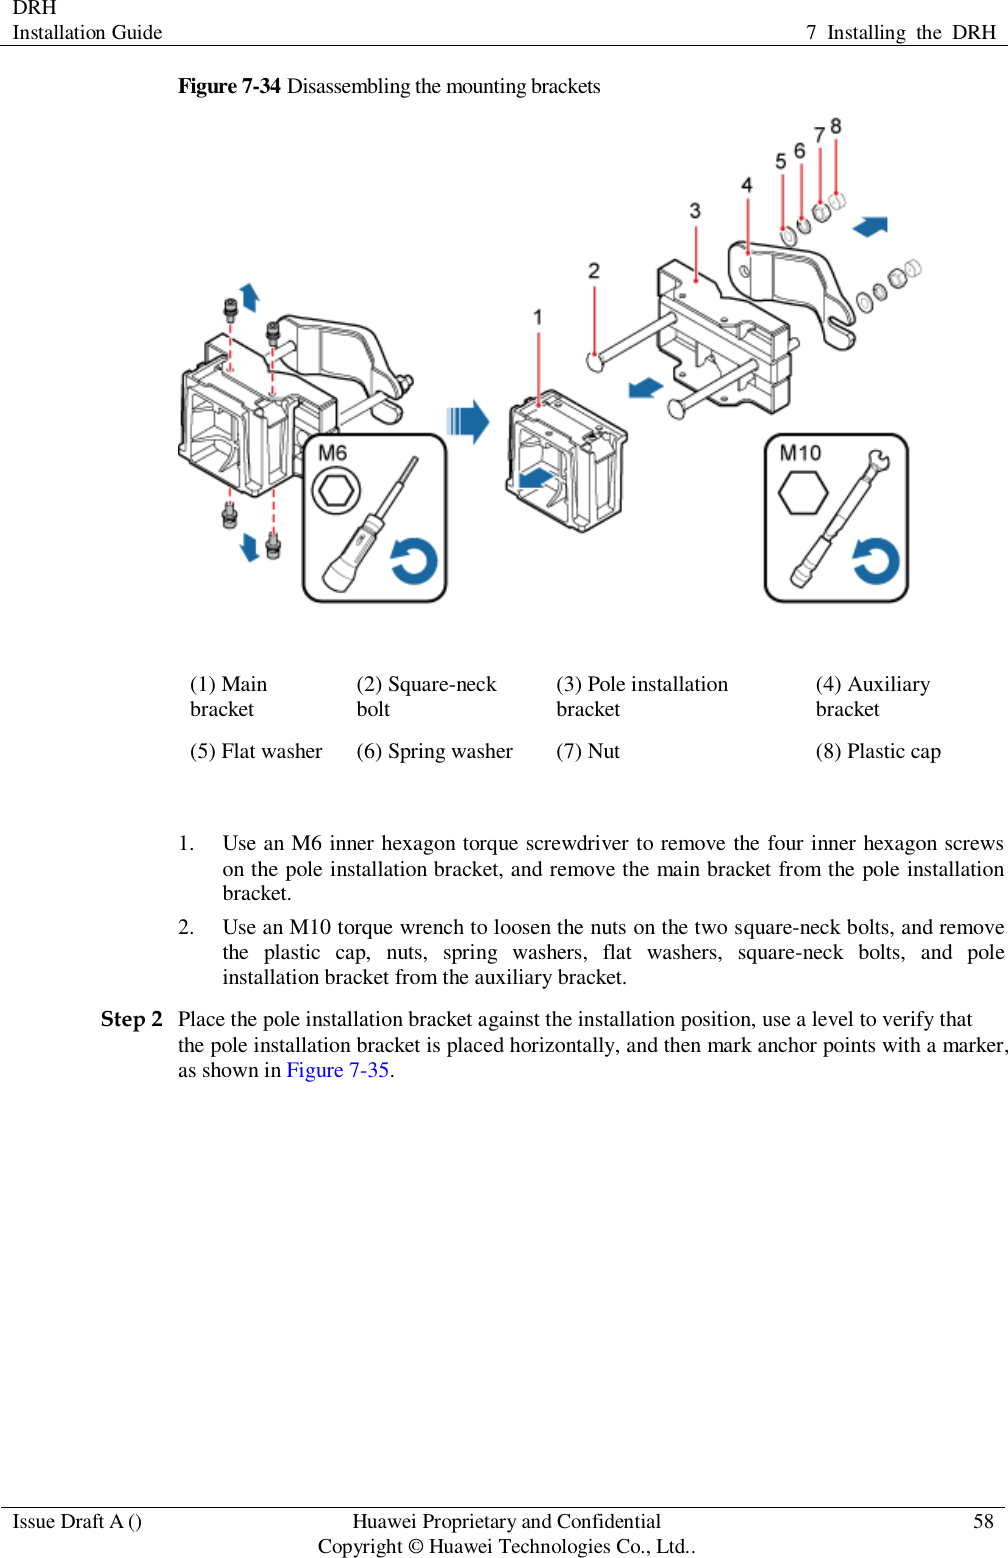 DRH   Installation Guide 7  Installing  the  DRH  Issue Draft A () Huawei Proprietary and Confidential                                     Copyright © Huawei Technologies Co., Ltd.. 58  Figure 7-34 Disassembling the mounting brackets  (1) Main bracket (2) Square-neck bolt (3) Pole installation bracket (4) Auxiliary bracket (5) Flat washer (6) Spring washer (7) Nut (8) Plastic cap  1. Use an M6 inner hexagon torque screwdriver to remove the four inner hexagon screws on the pole installation bracket, and remove the main bracket from the pole installation bracket. 2. Use an M10 torque wrench to loosen the nuts on the two square-neck bolts, and remove the  plastic  cap,  nuts,  spring  washers,  flat  washers,  square-neck  bolts,  and  pole installation bracket from the auxiliary bracket. Step 2 Place the pole installation bracket against the installation position, use a level to verify that the pole installation bracket is placed horizontally, and then mark anchor points with a marker, as shown in Figure 7-35. 